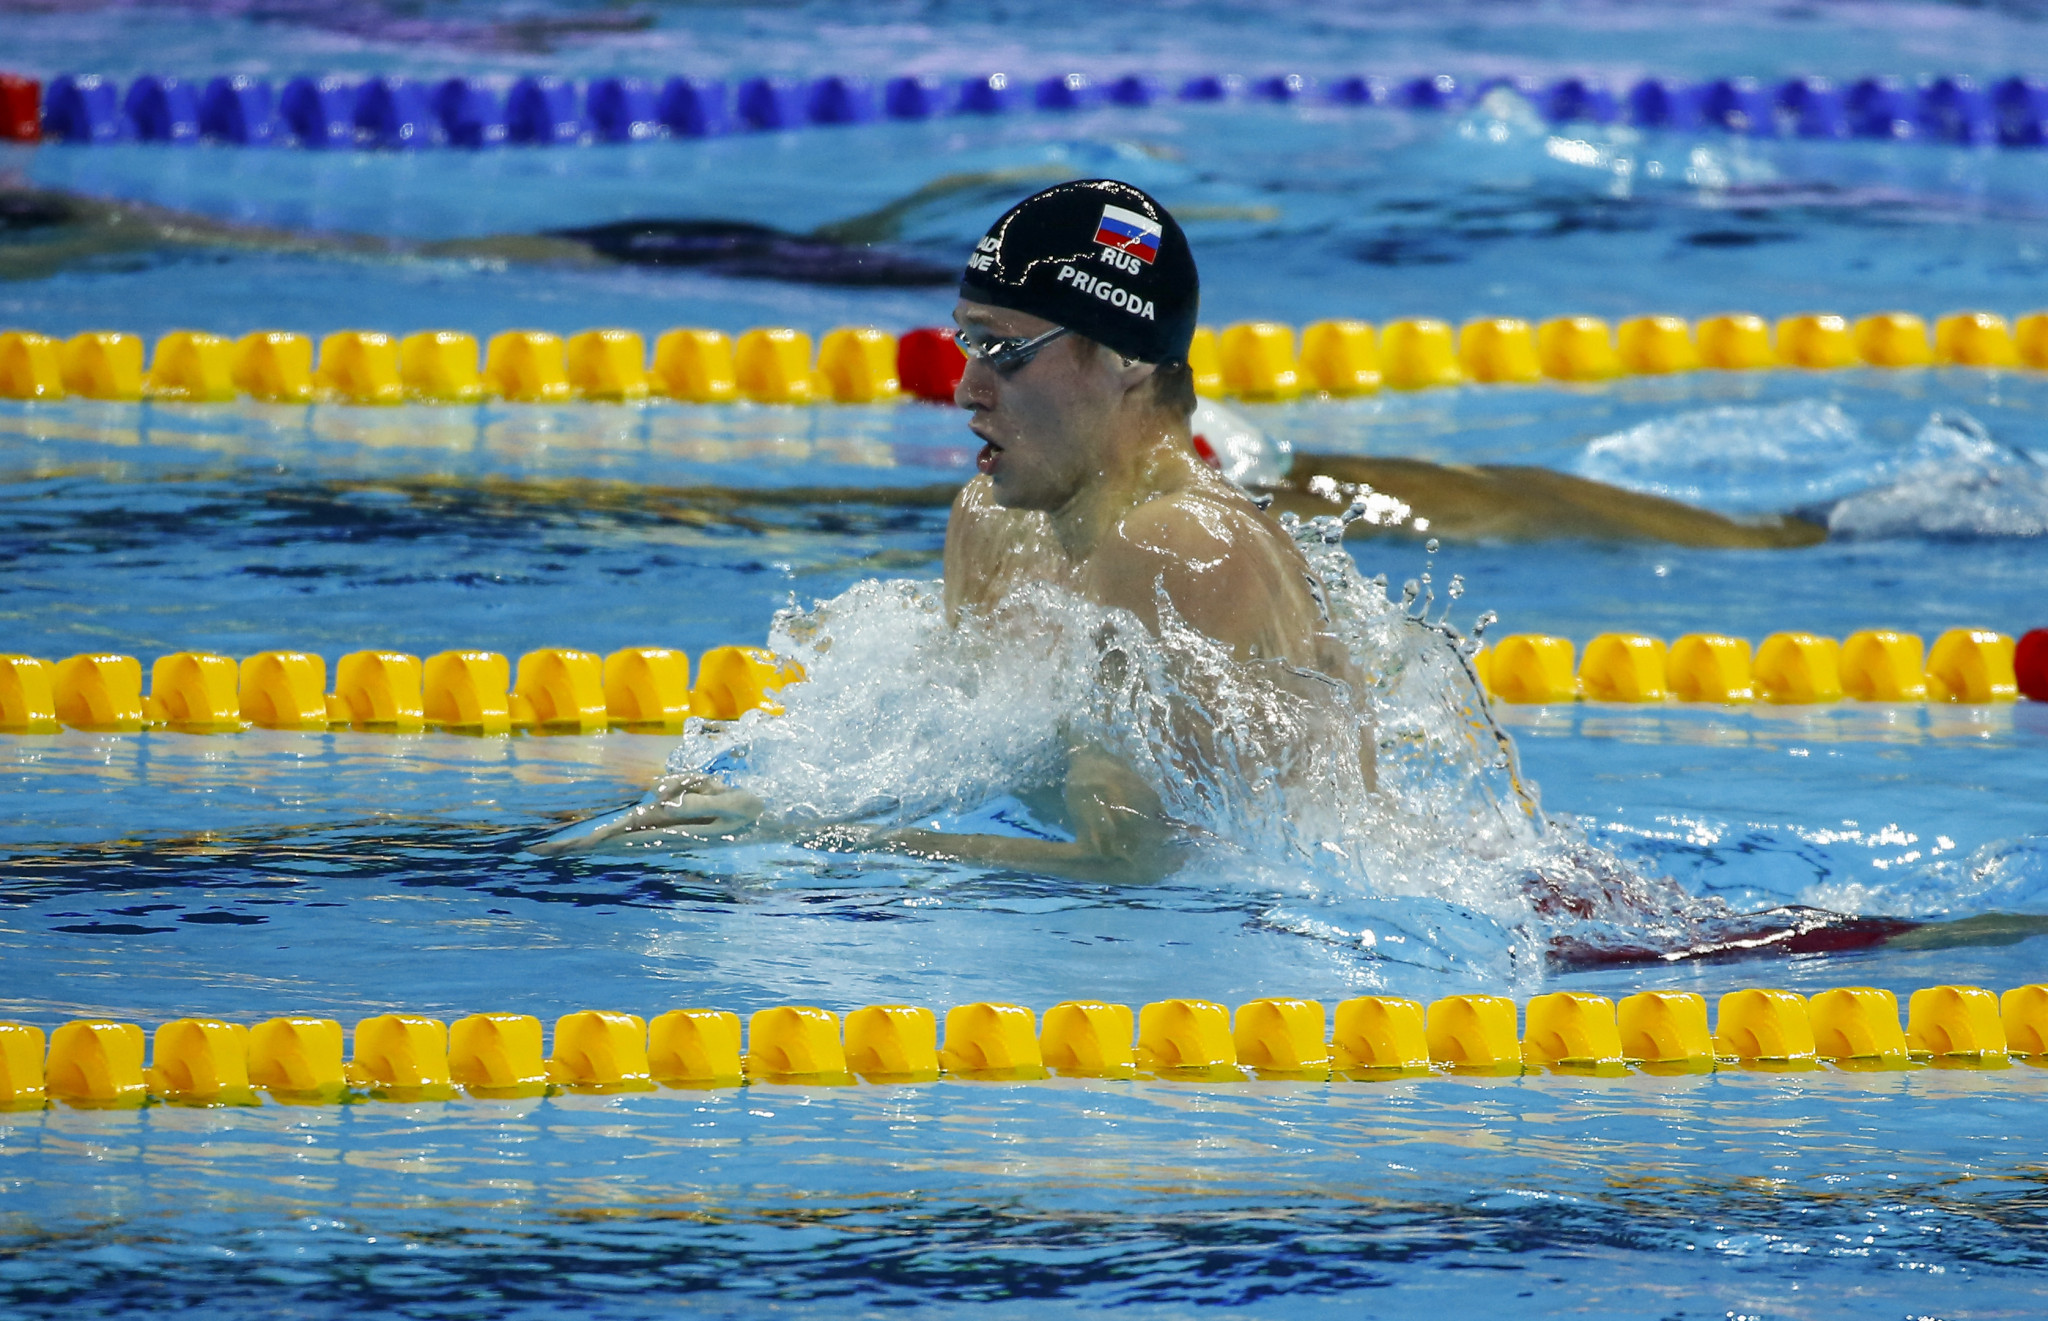 Russian Kirill Prigoda broke the world record on his way to gold in the 200m breaststroke ©Getty Images